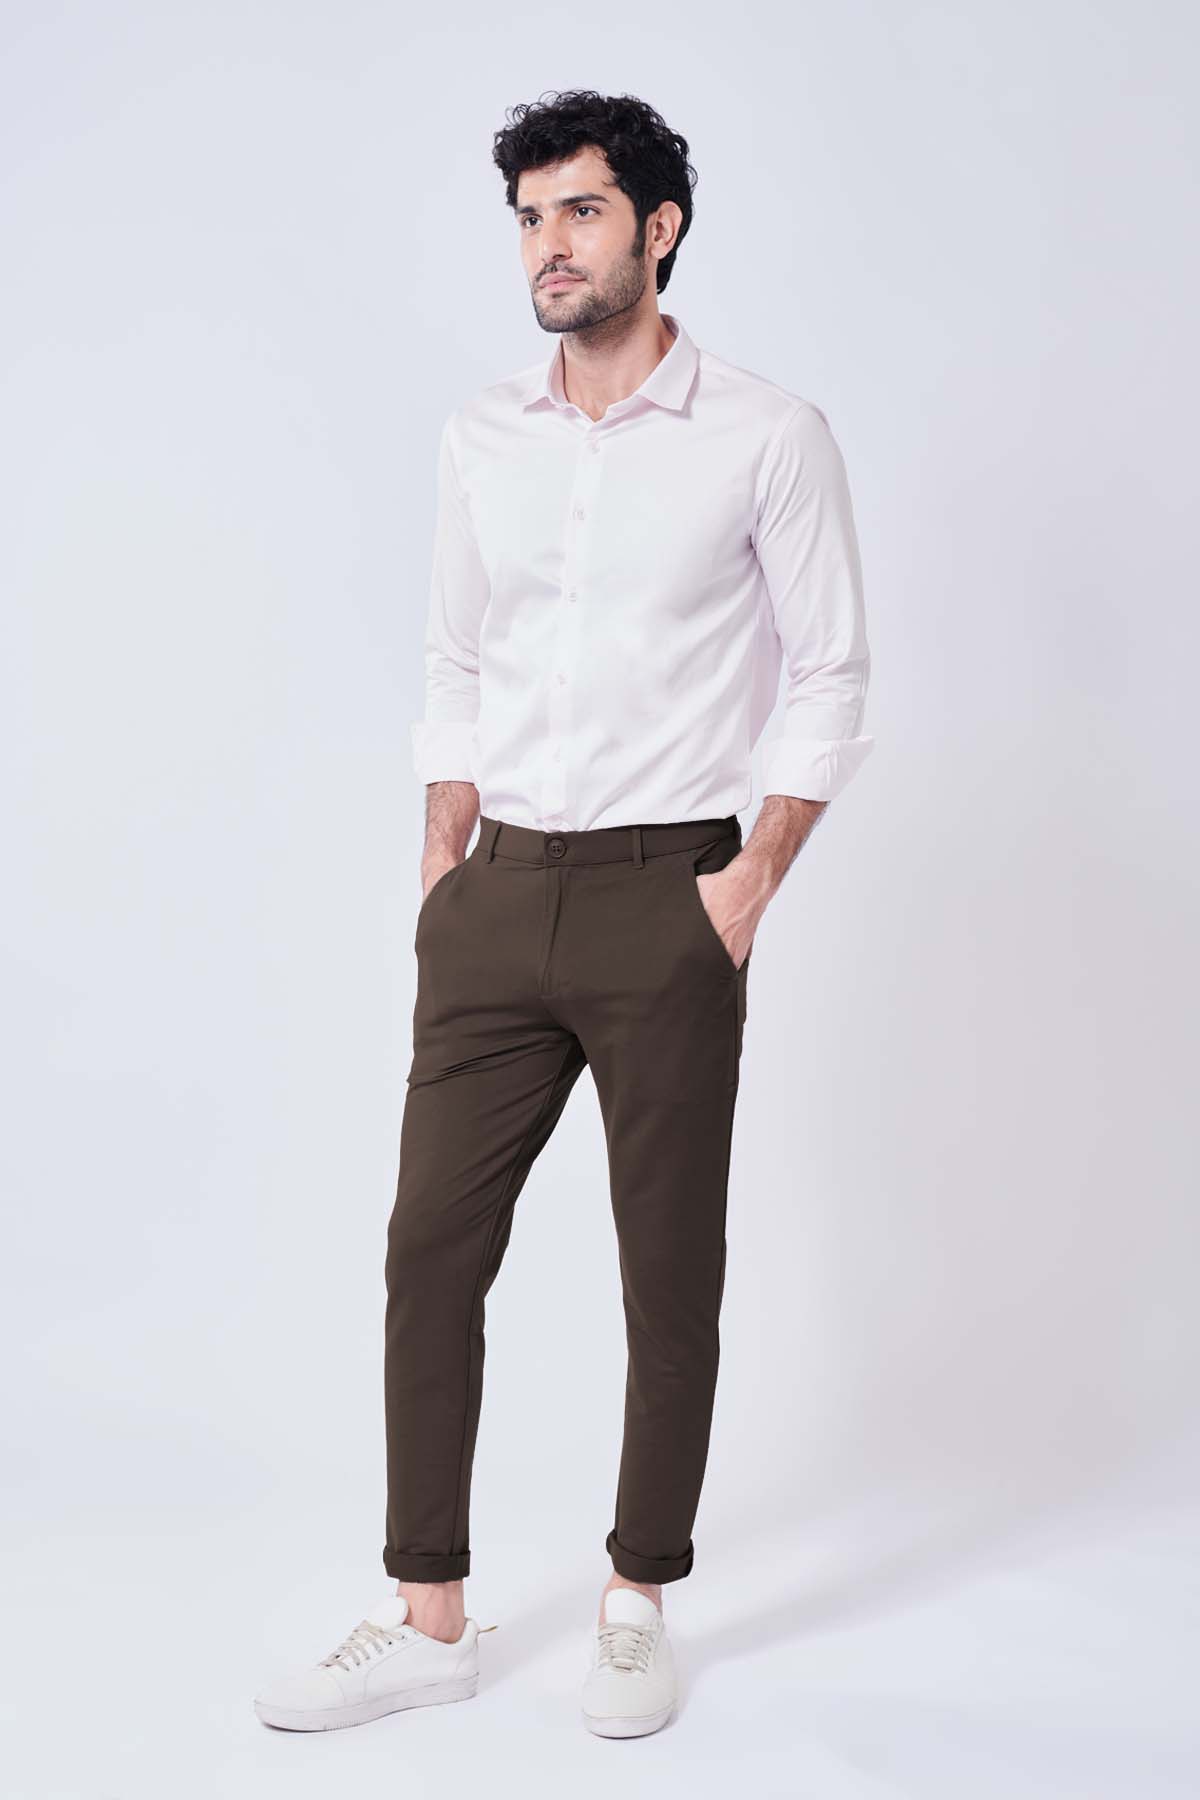 What pants go with a brown shirt? - Quora